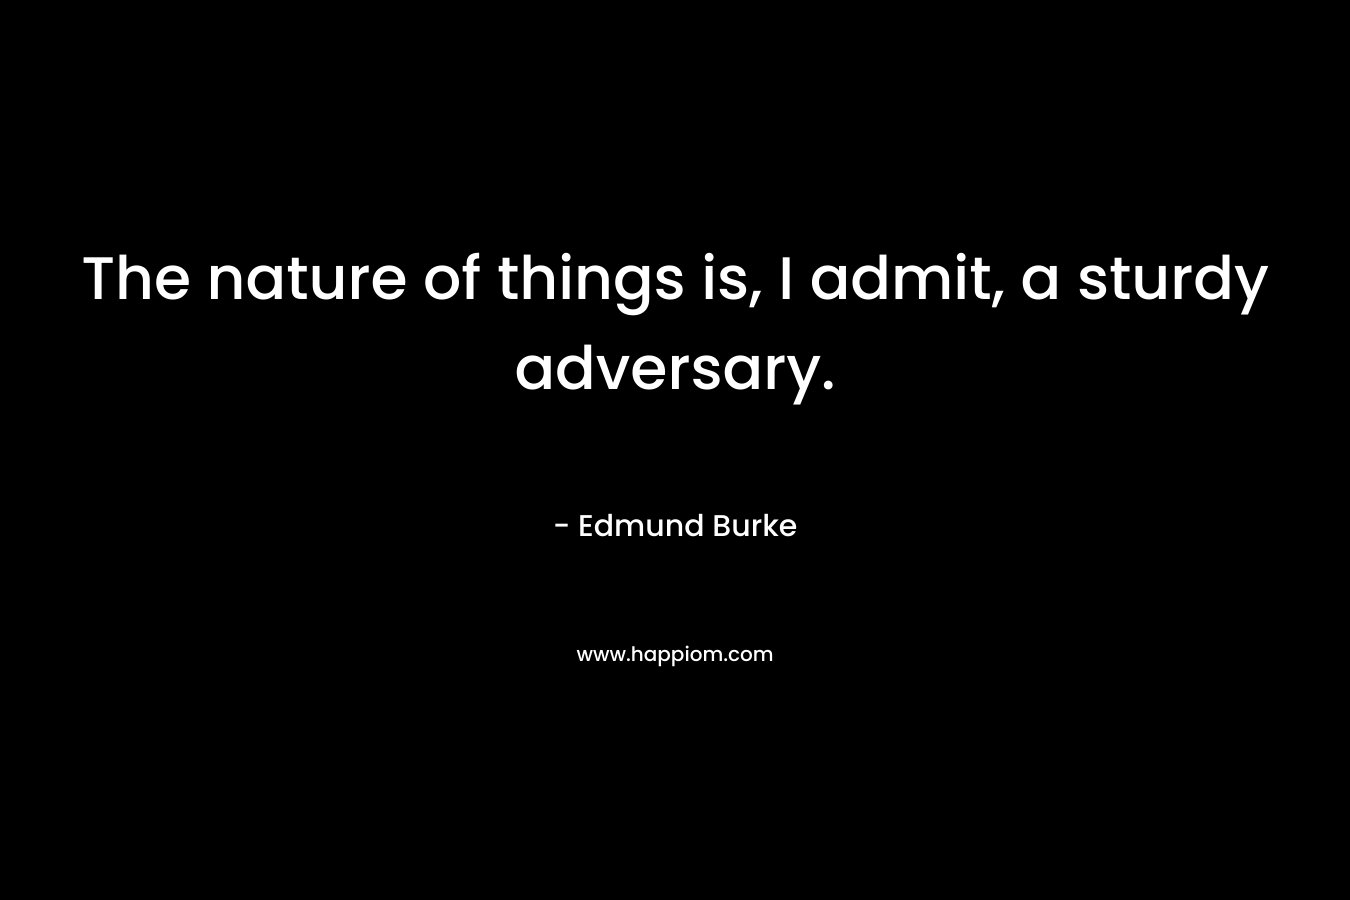 The nature of things is, I admit, a sturdy adversary. – Edmund Burke